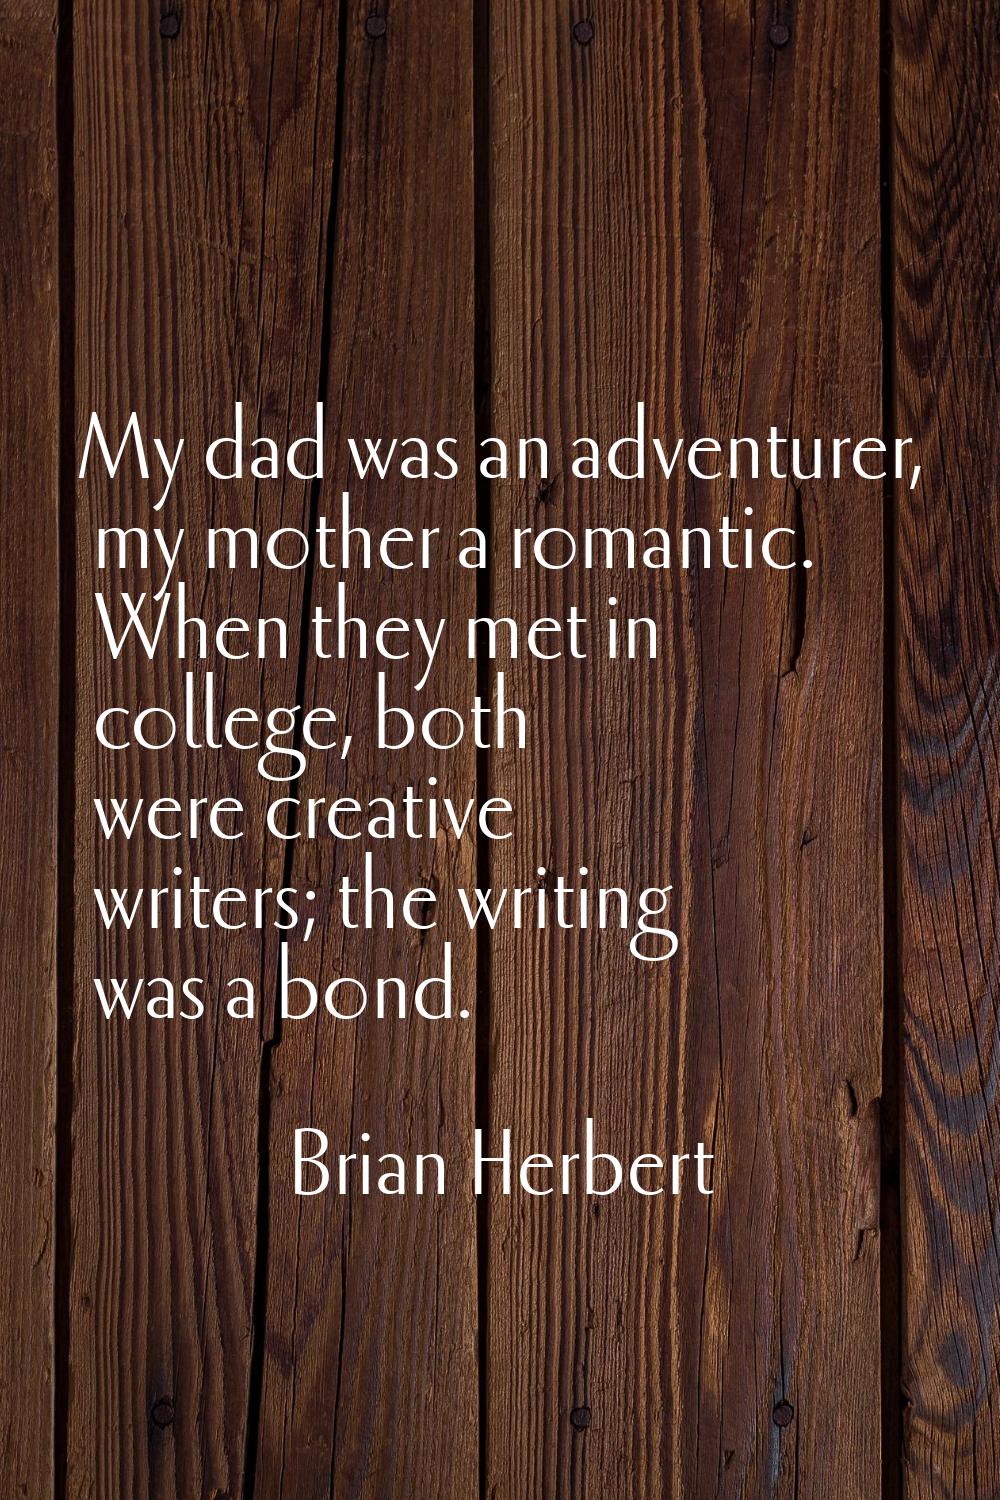 My dad was an adventurer, my mother a romantic. When they met in college, both were creative writer